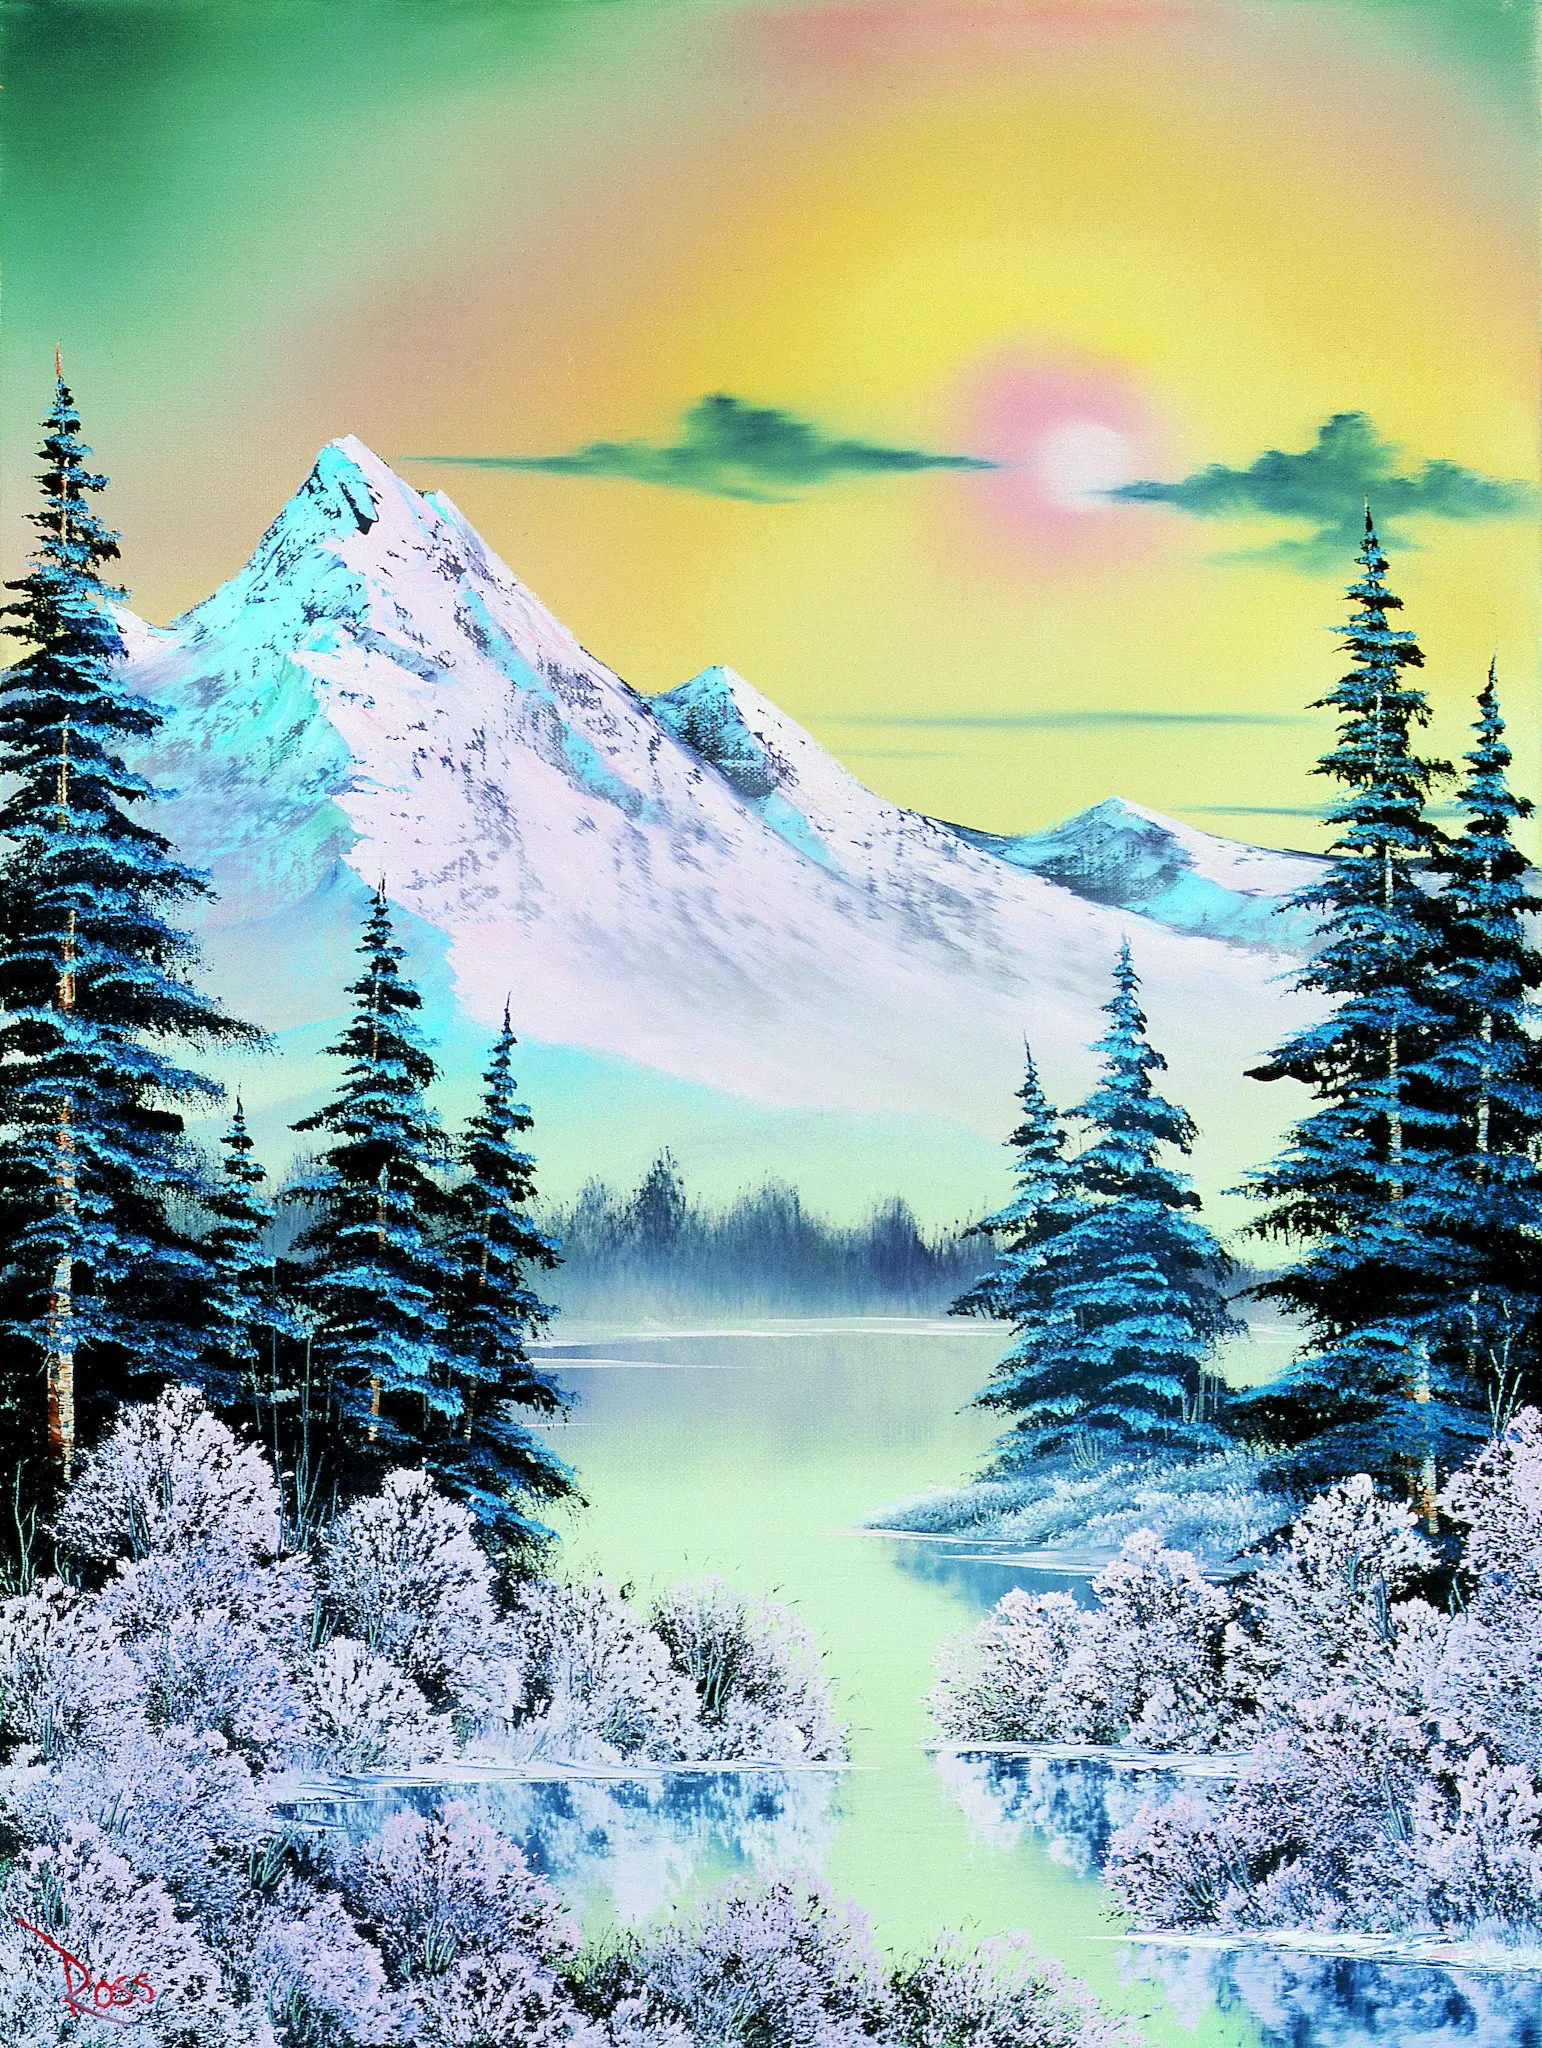 Are There Potentially 34,000 Bob Ross Paintings in the World?